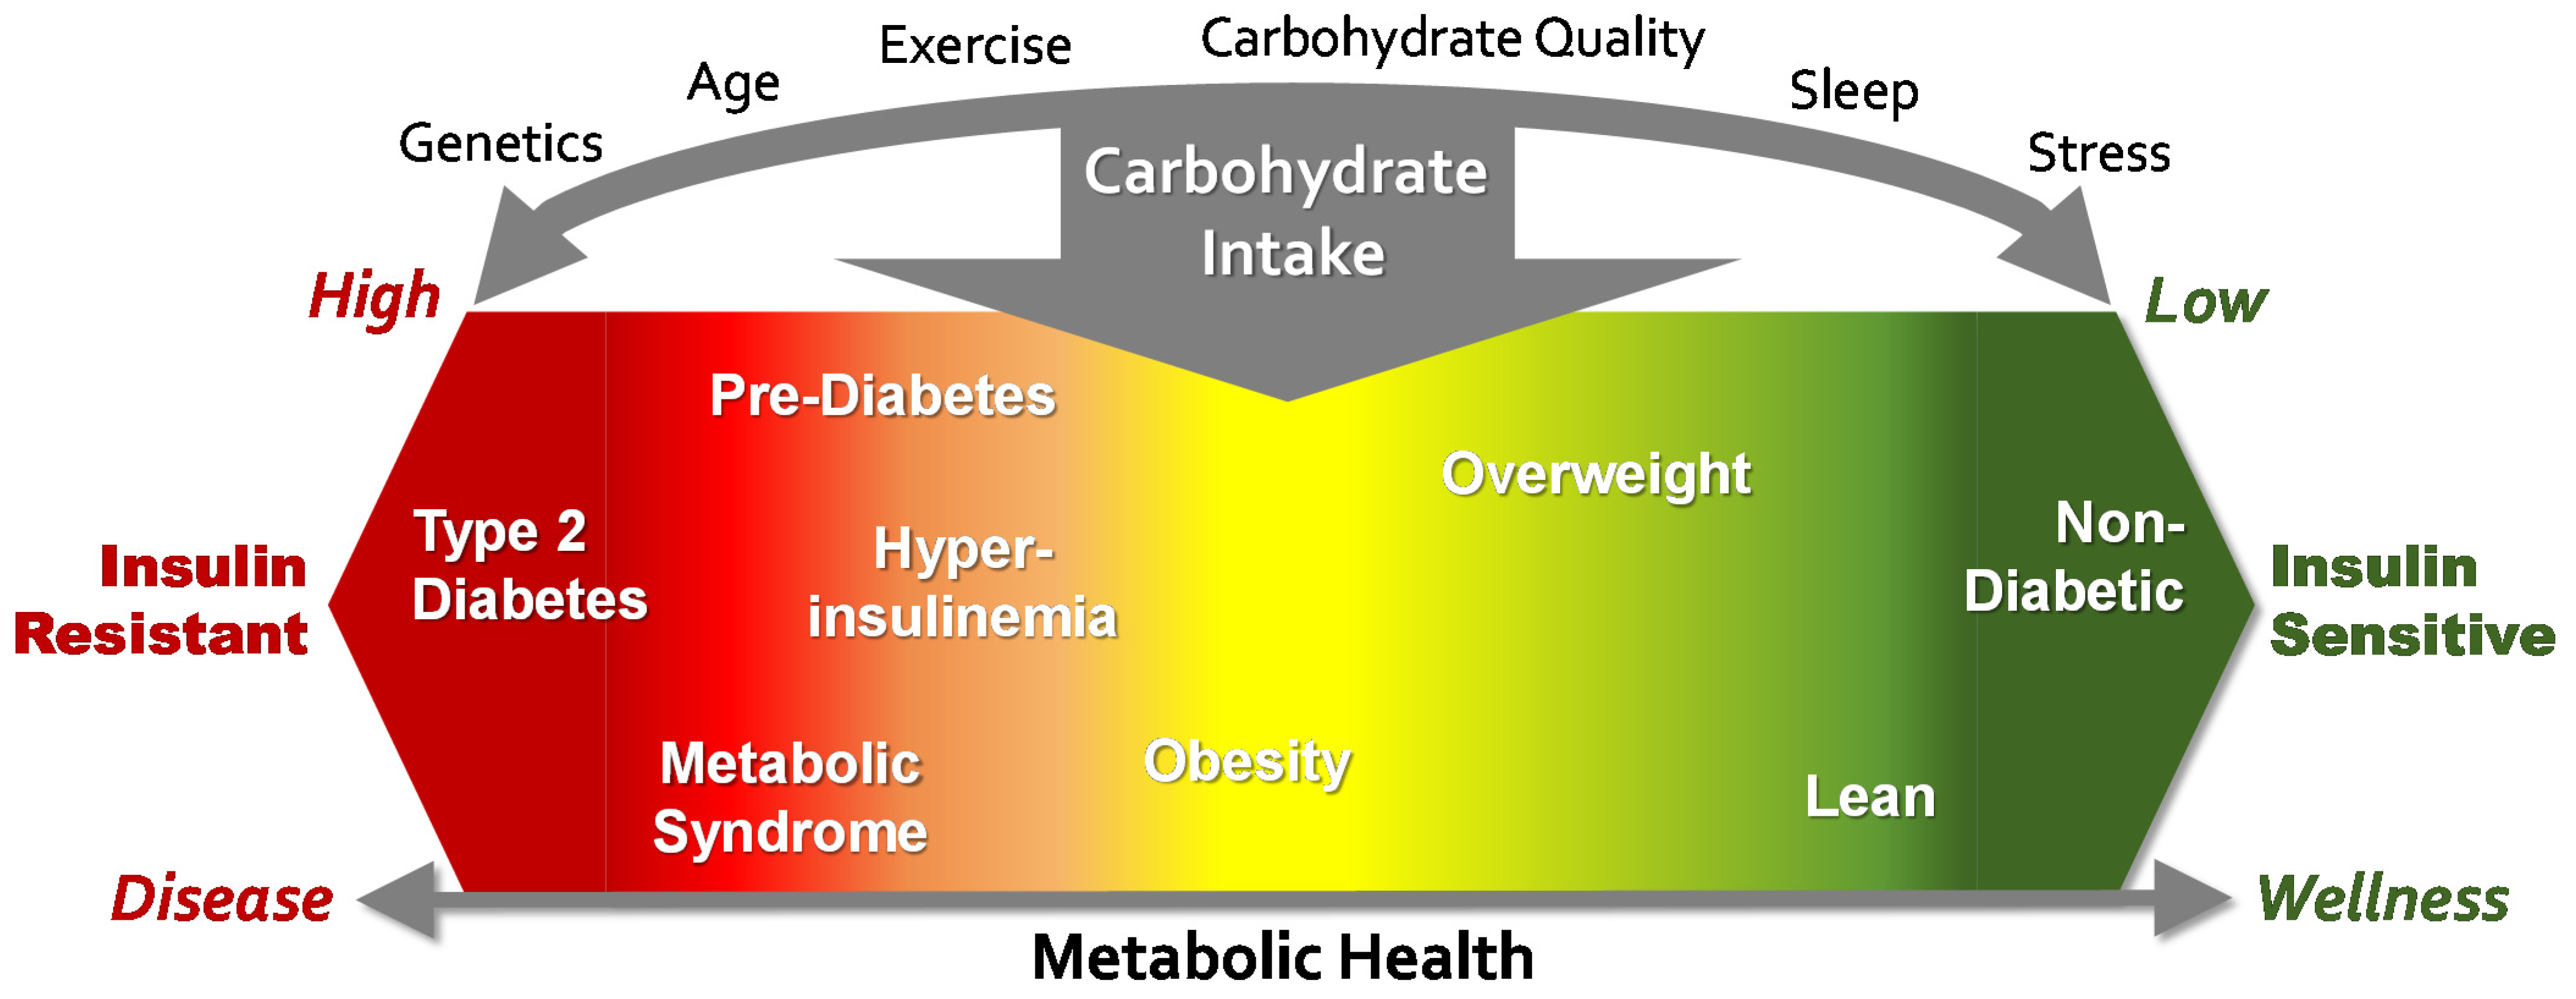 Nutrients | Free Full-Text | Alternative Dietary Patterns for Americans:  Low-Carbohydrate Diets